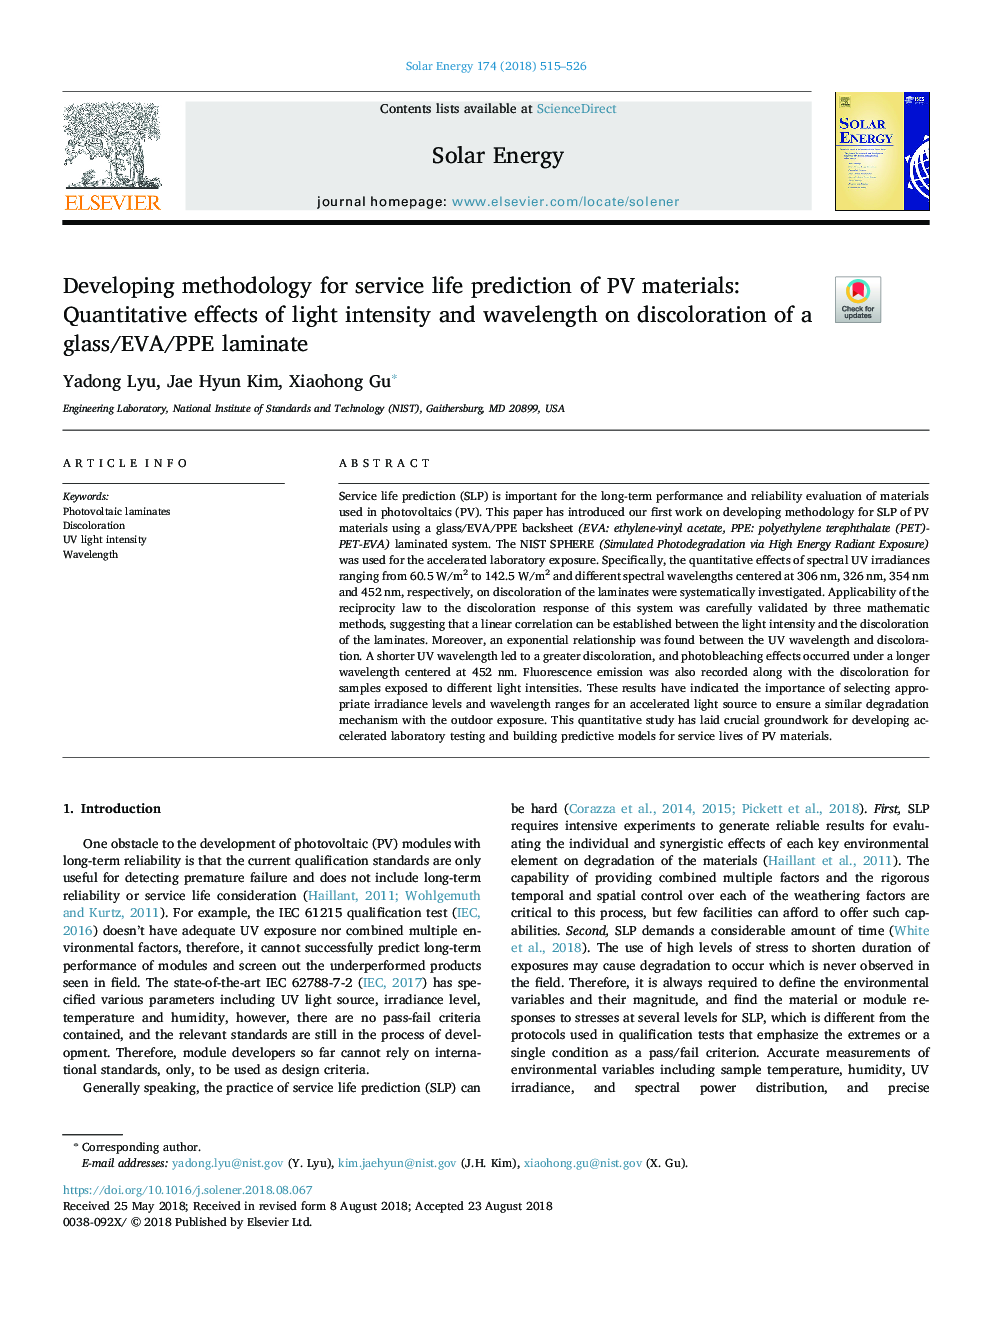 Developing methodology for service life prediction of PV materials: Quantitative effects of light intensity and wavelength on discoloration of a glass/EVA/PPE laminate